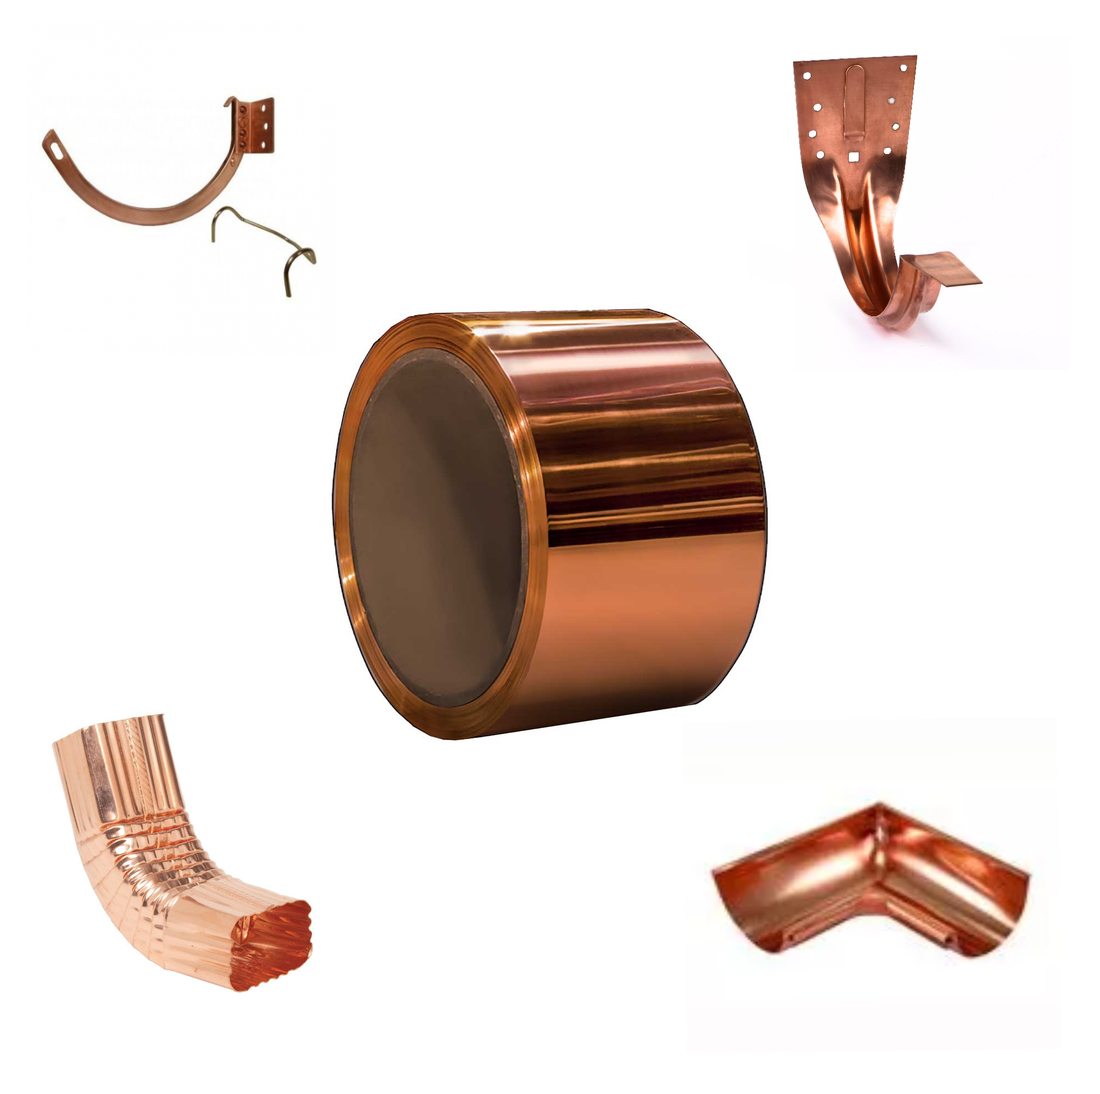 We Stock a Full Range of Copper Products